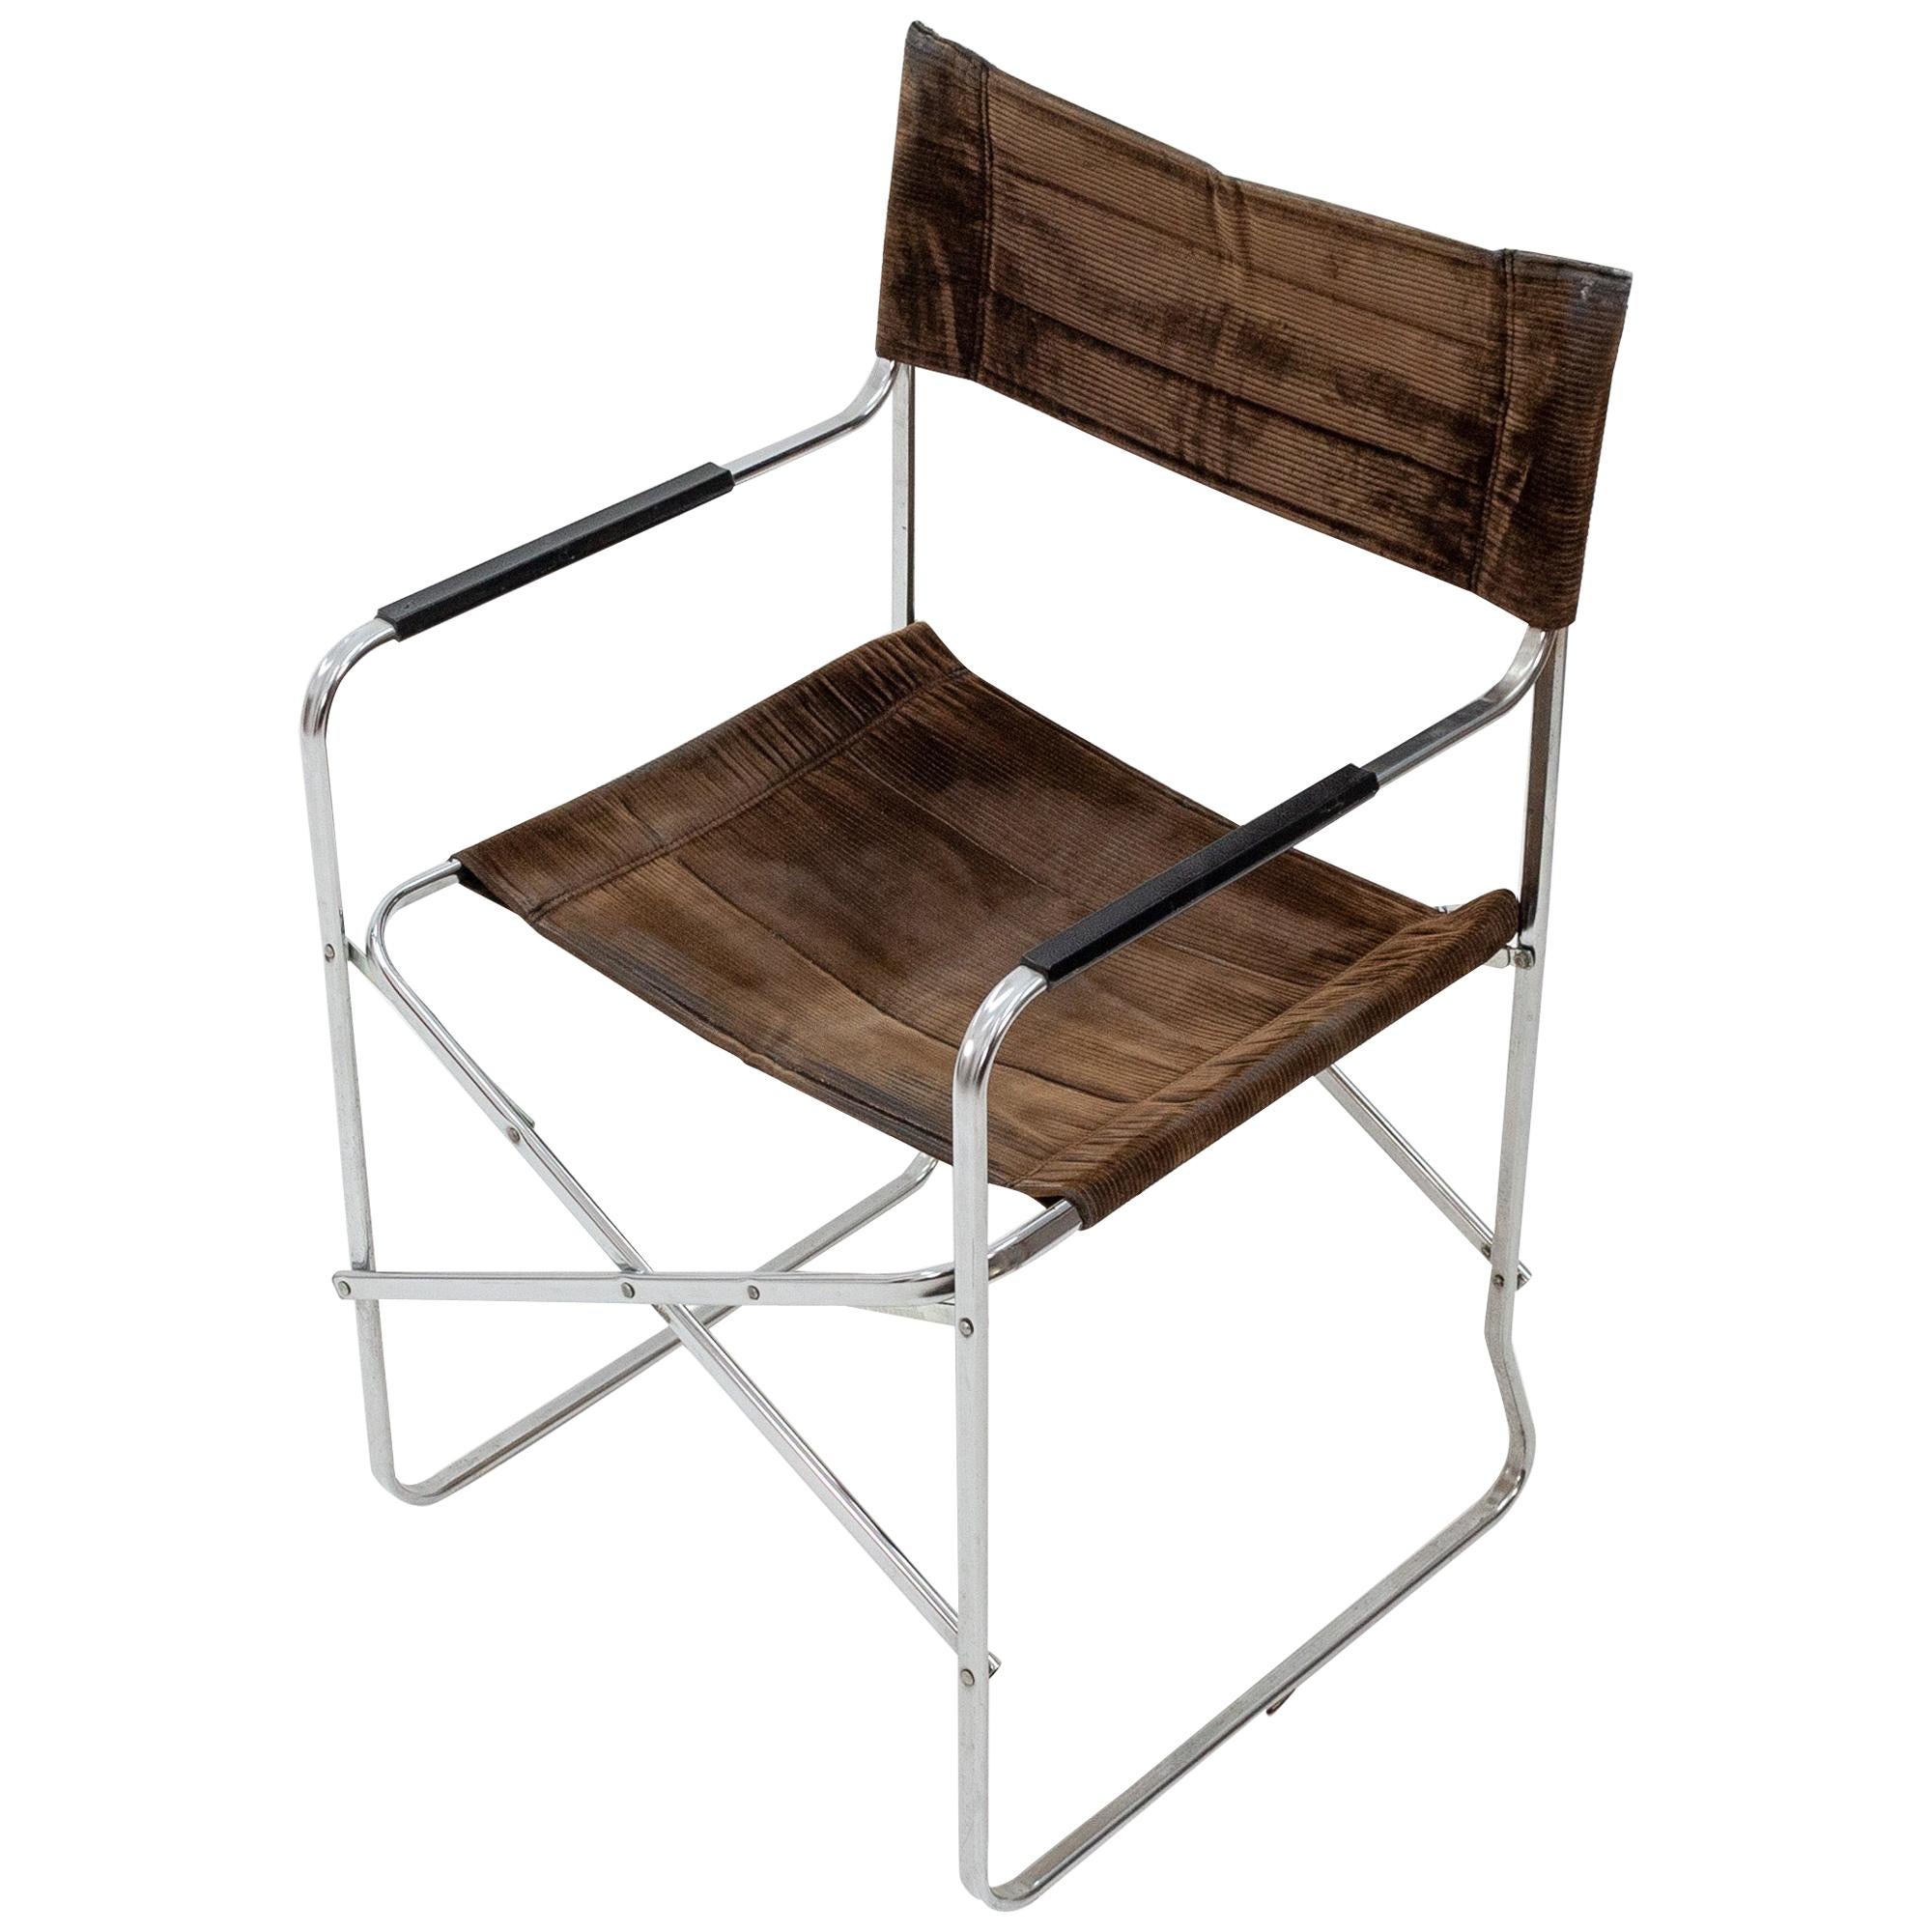 Italian Folding Chair in the Style of Gae Aulenti's 'April' Chair